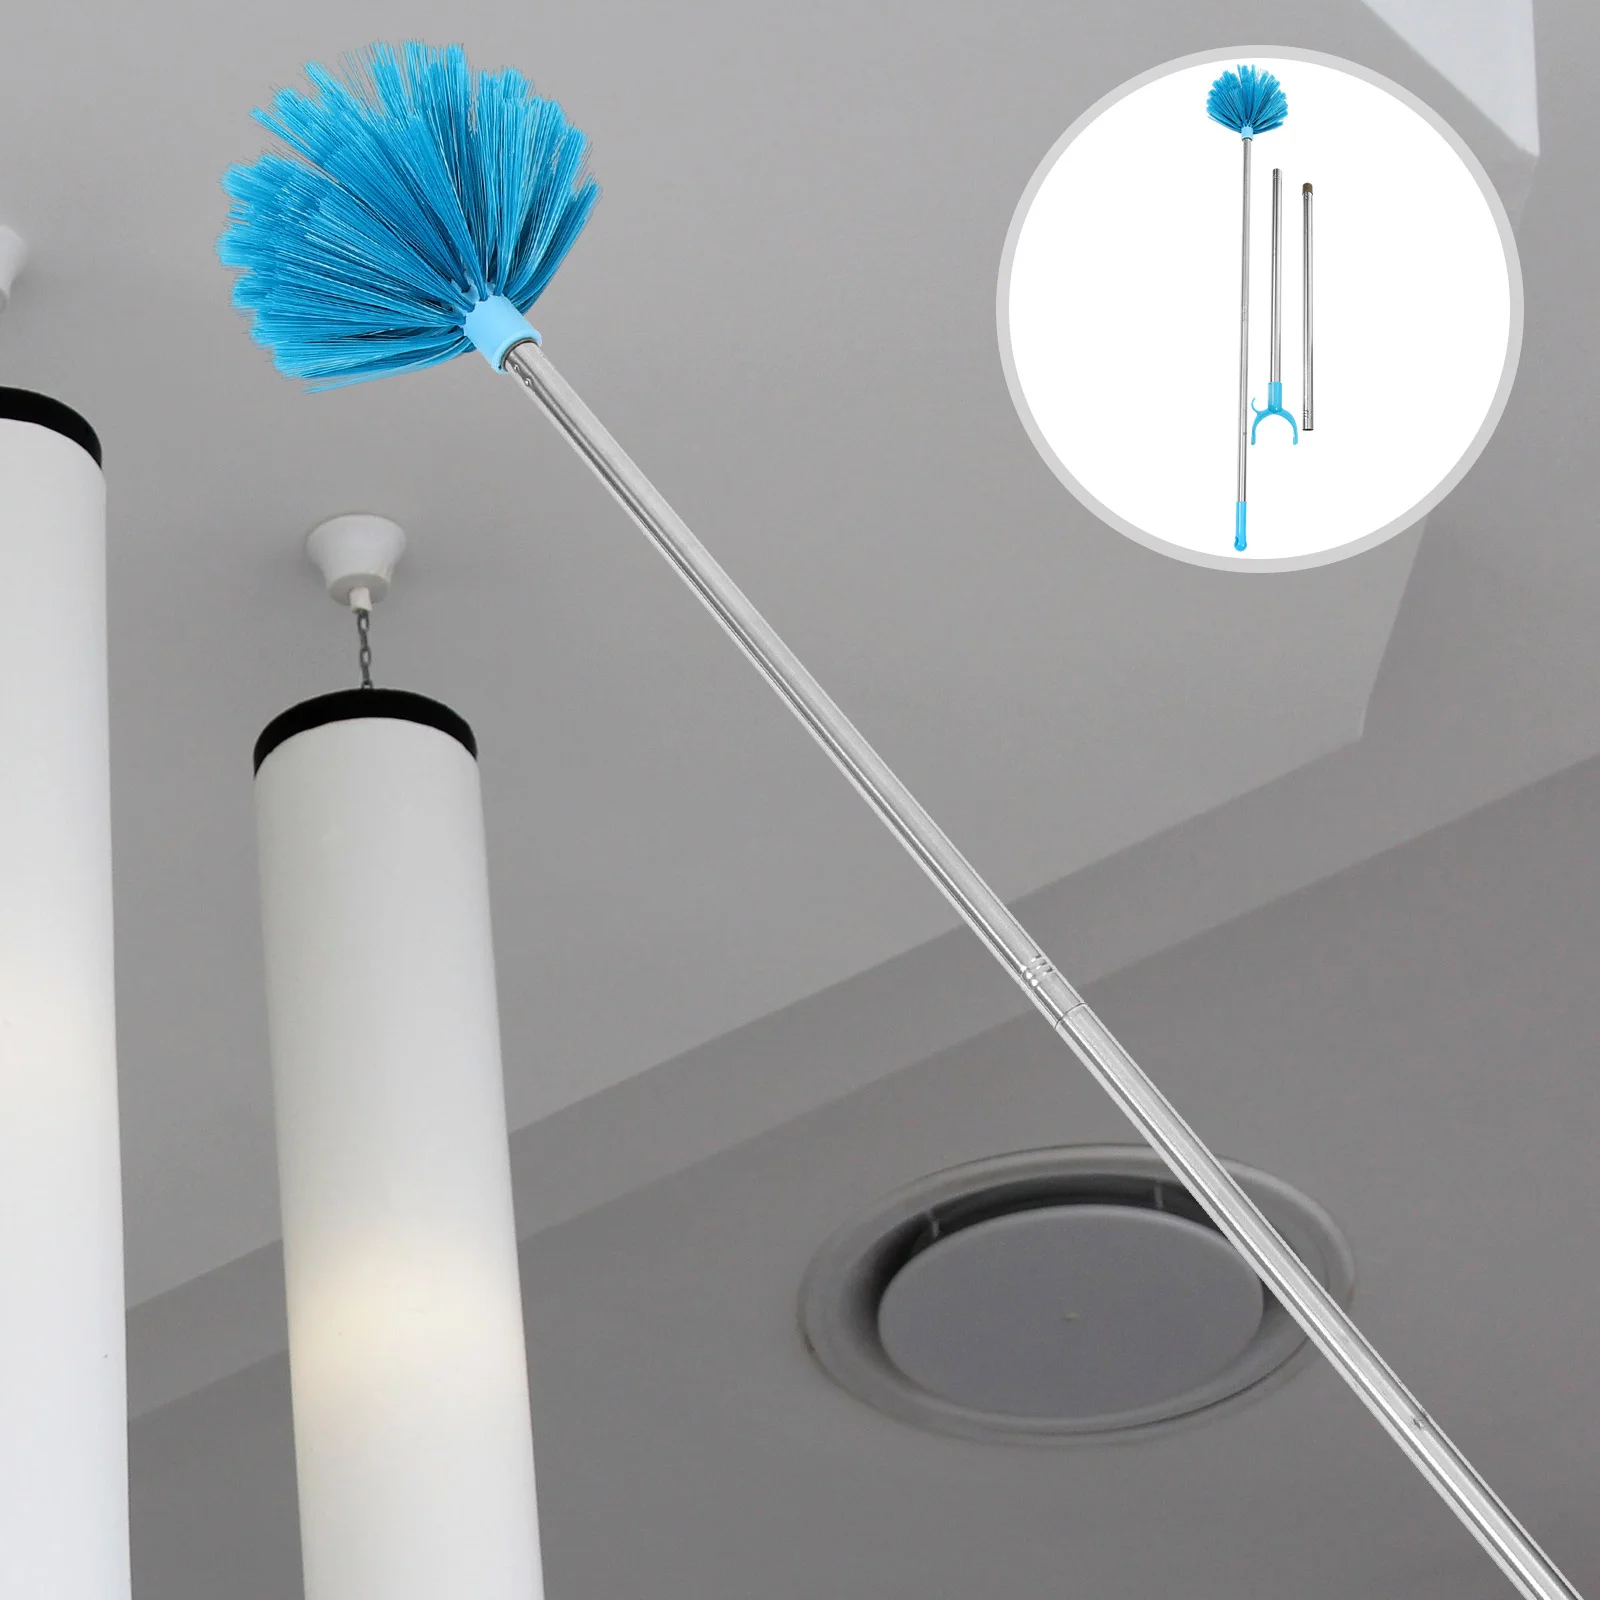 

Telescopic Dust Brush Duster Spider Web Dusting Extended Stainless Steel with Extension Pole Cleaner Cobweb Remover Wall